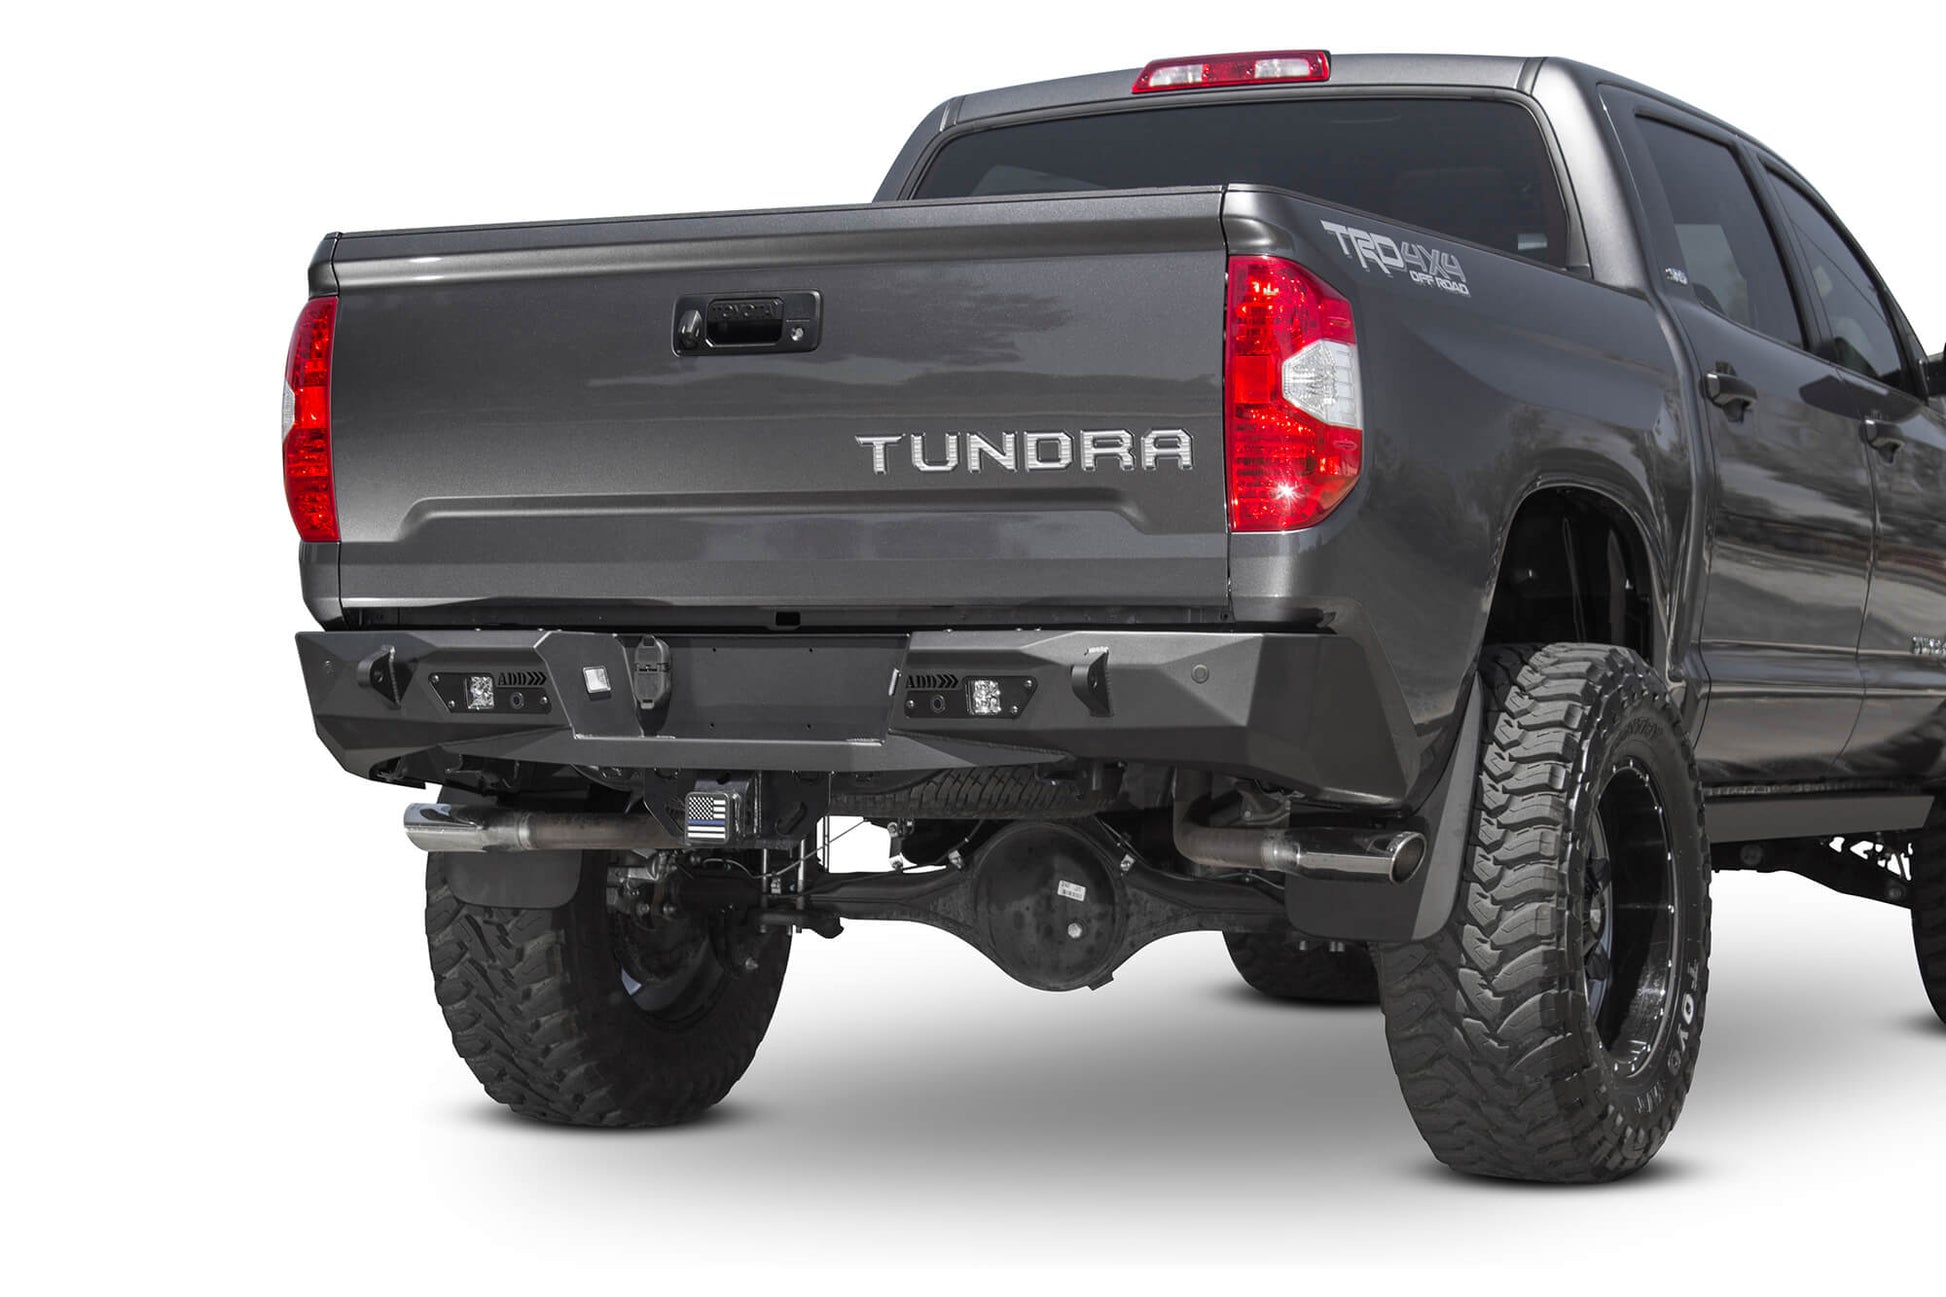 Installed on Car ADD Toyota Stealth Fighter Rear Bumper | 2014-2021 Tundra